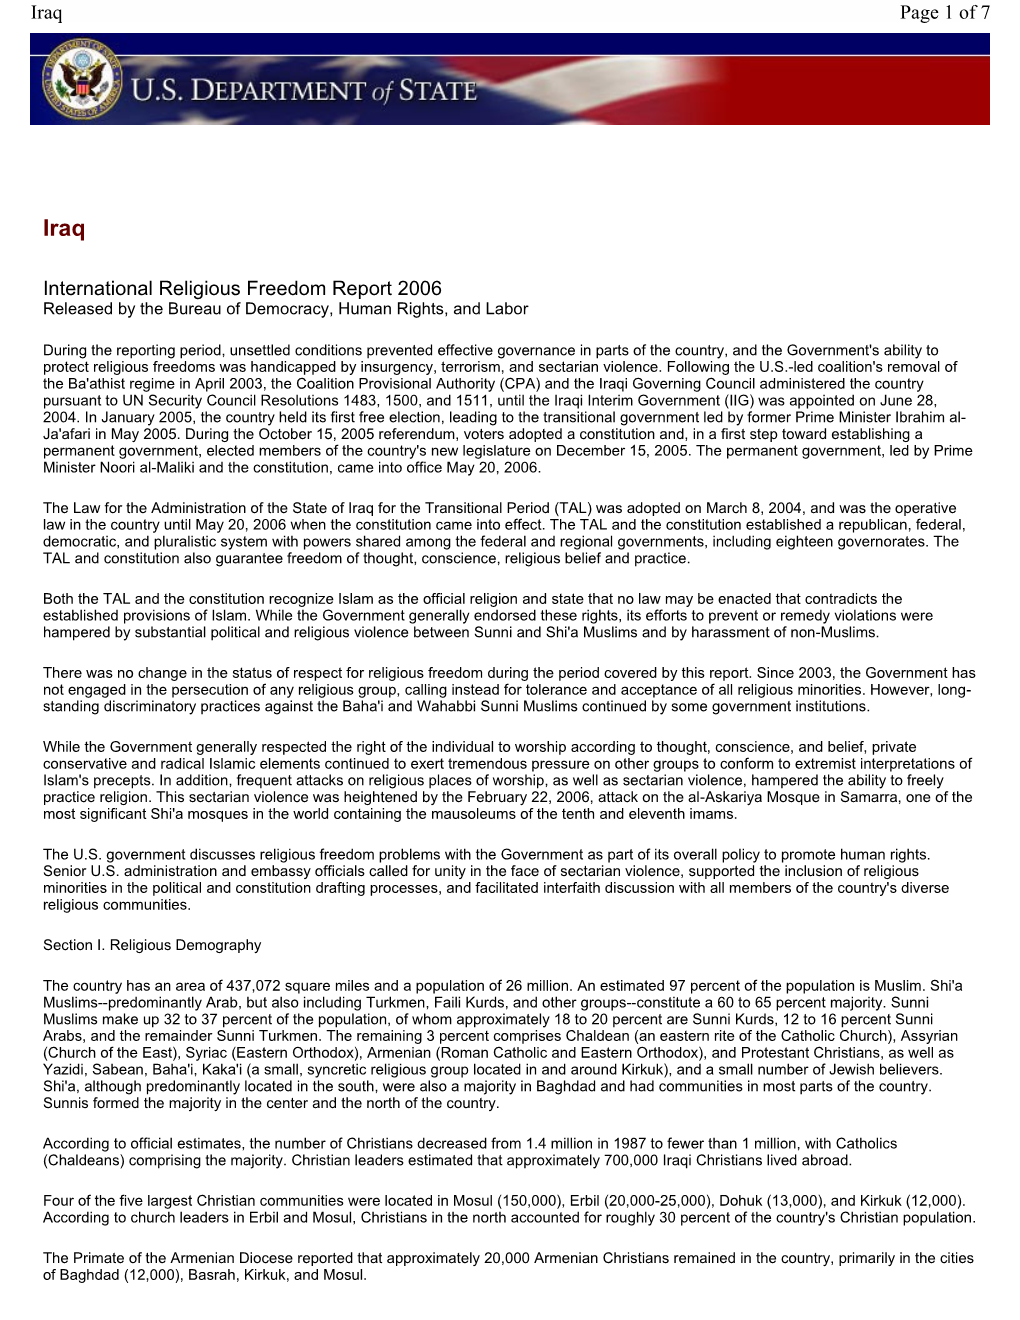 International Religious Freedom Report 2006 Page 1 of 7 Iraq